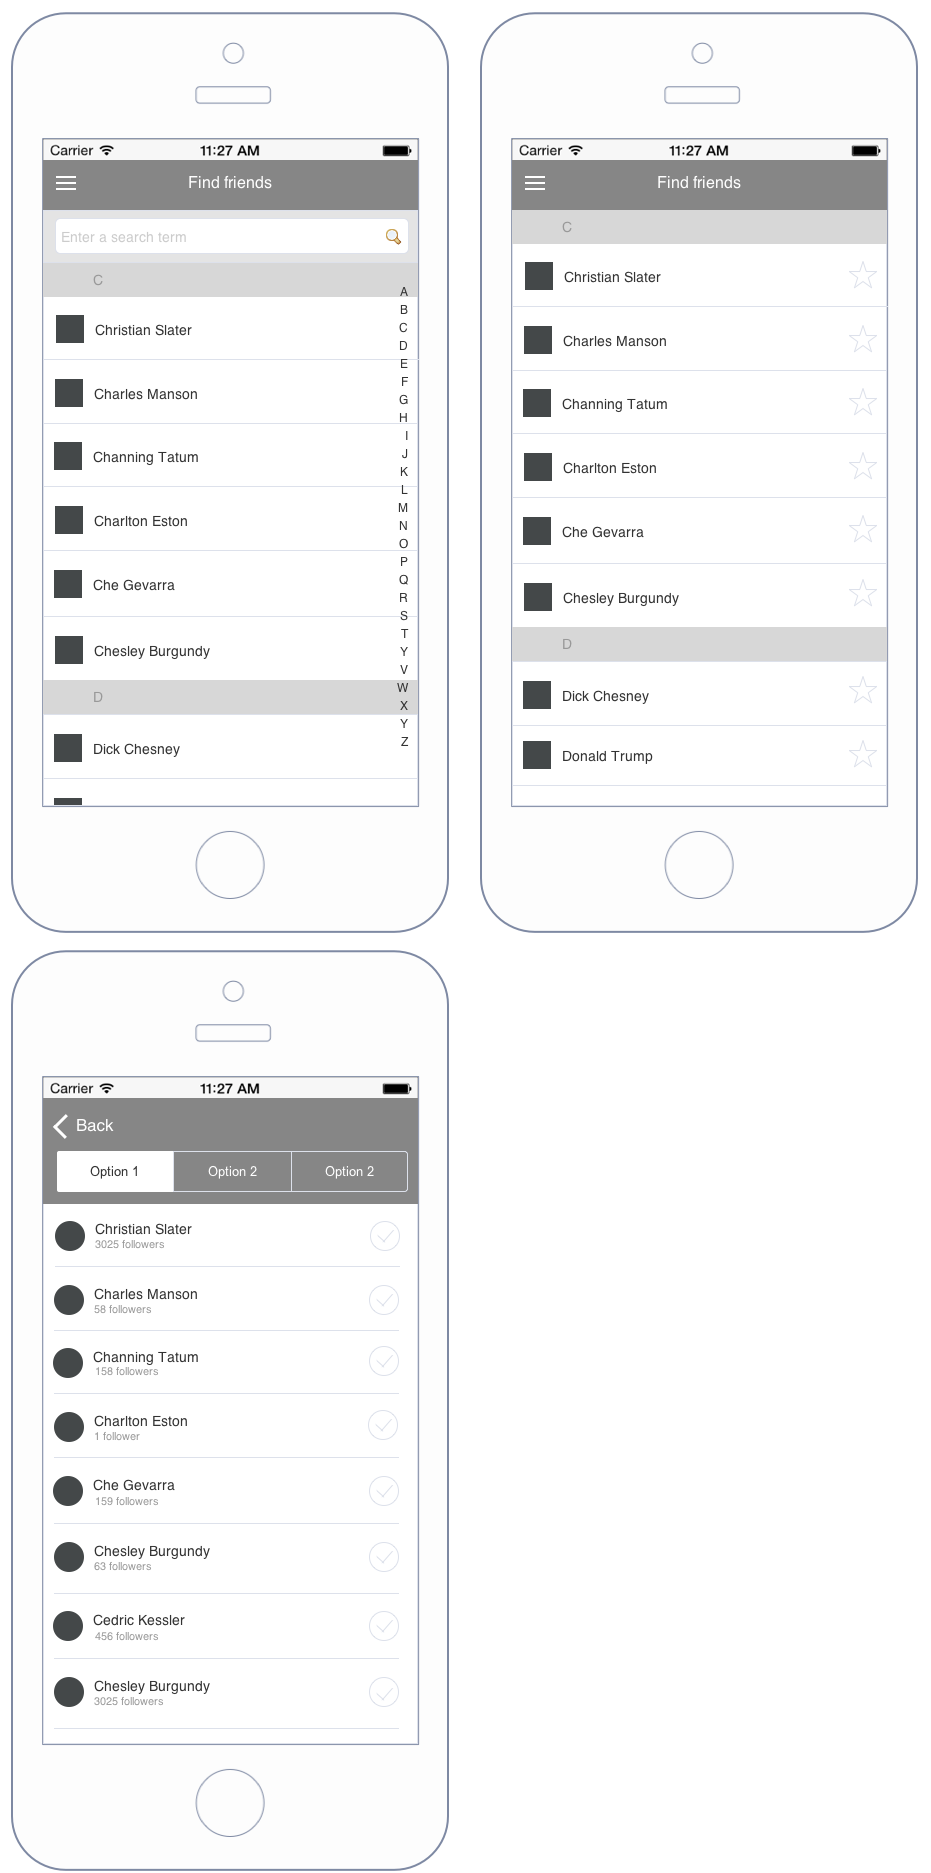 Totalwireframe 原型素材系列之 iPhone Apps Library [for Axure]插图(8)